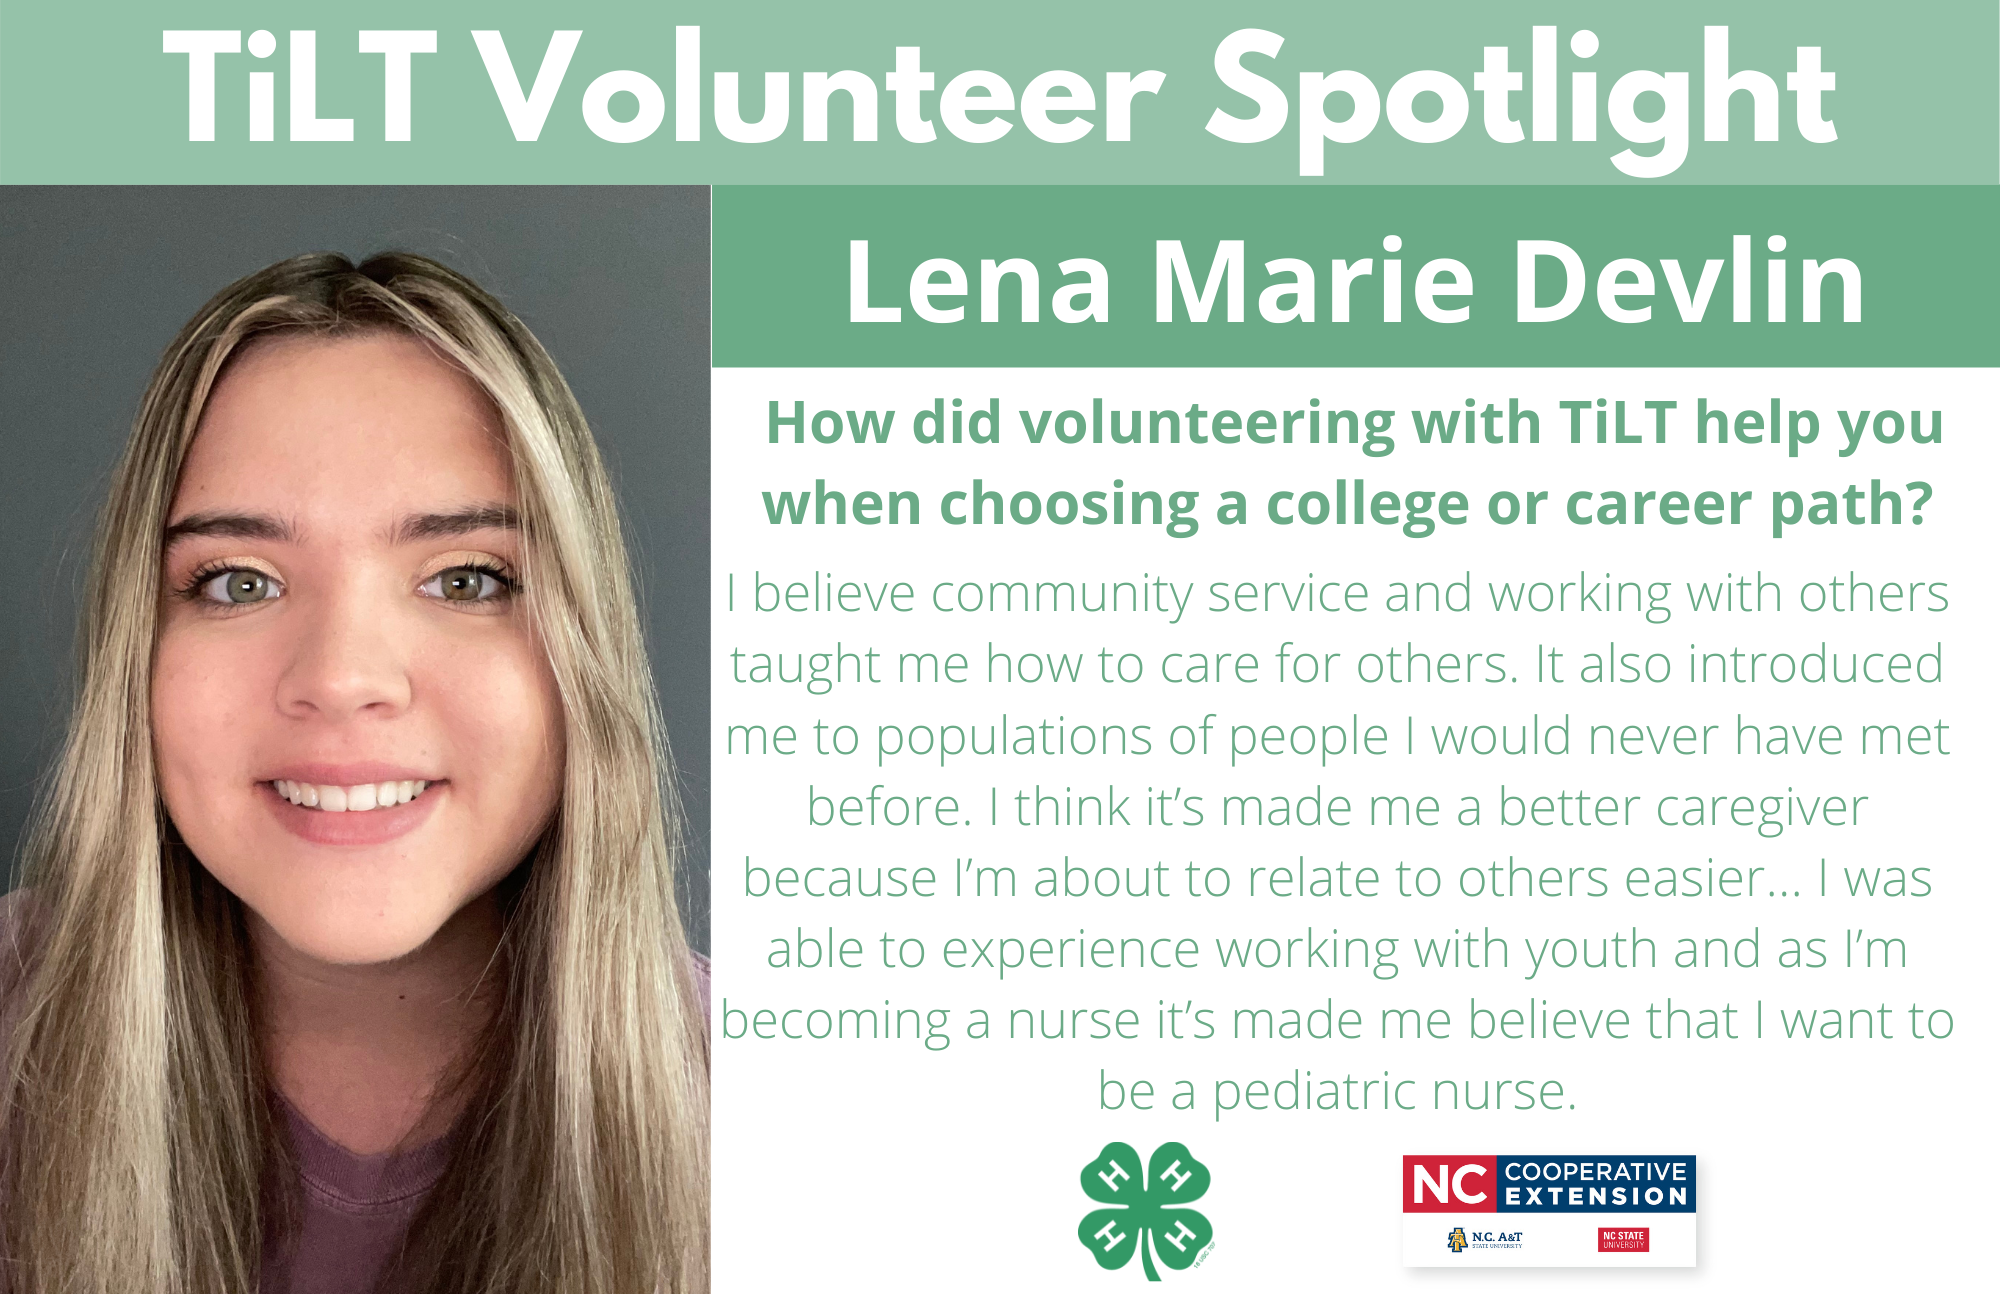 Headshot of Lena Marie Devlin with following text to the right of image. TiLT Volunteer Spotlight. Lena Marie Devlin. How did volunteering with TiLT help you when choosing a college or career path? I believe community service and working with others taught me how to care for others. Also introduced me to populations of people I would never have met before. I think it’s made me a better caregiver because I’m about to relate to others easier... I was able to experience working with youth and as I’m becoming a nurse it’s made me believe that I want to be a pediatric nurse.